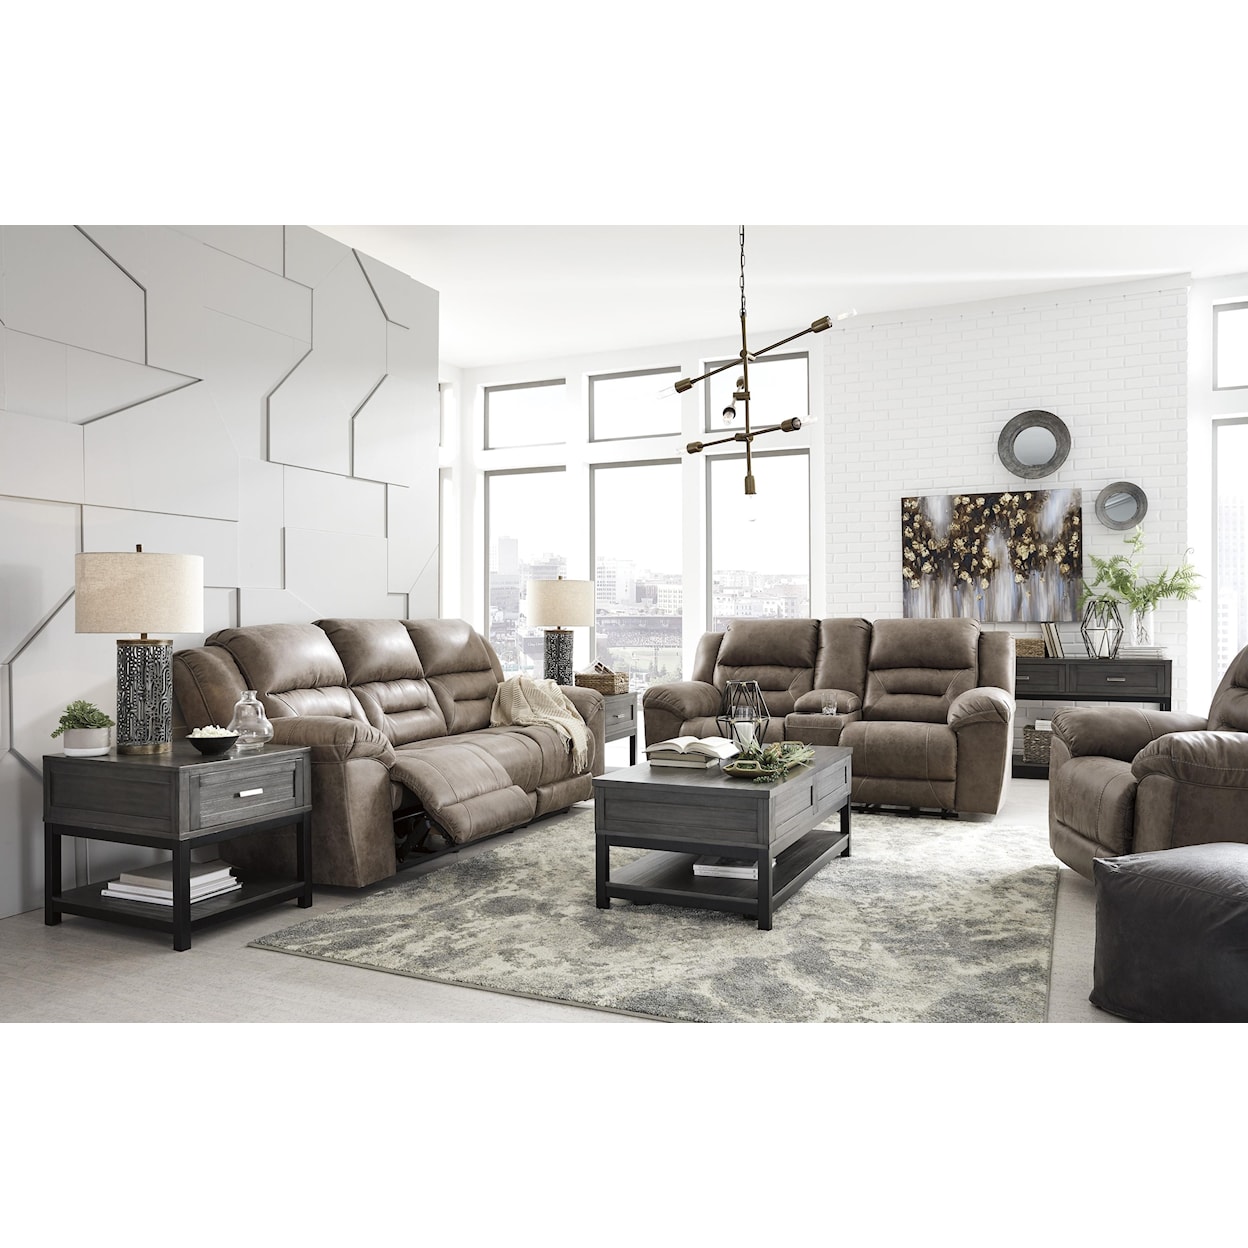 Signature Design by Ashley Stoneland Power Recliner Sofa and Power Recliner Set